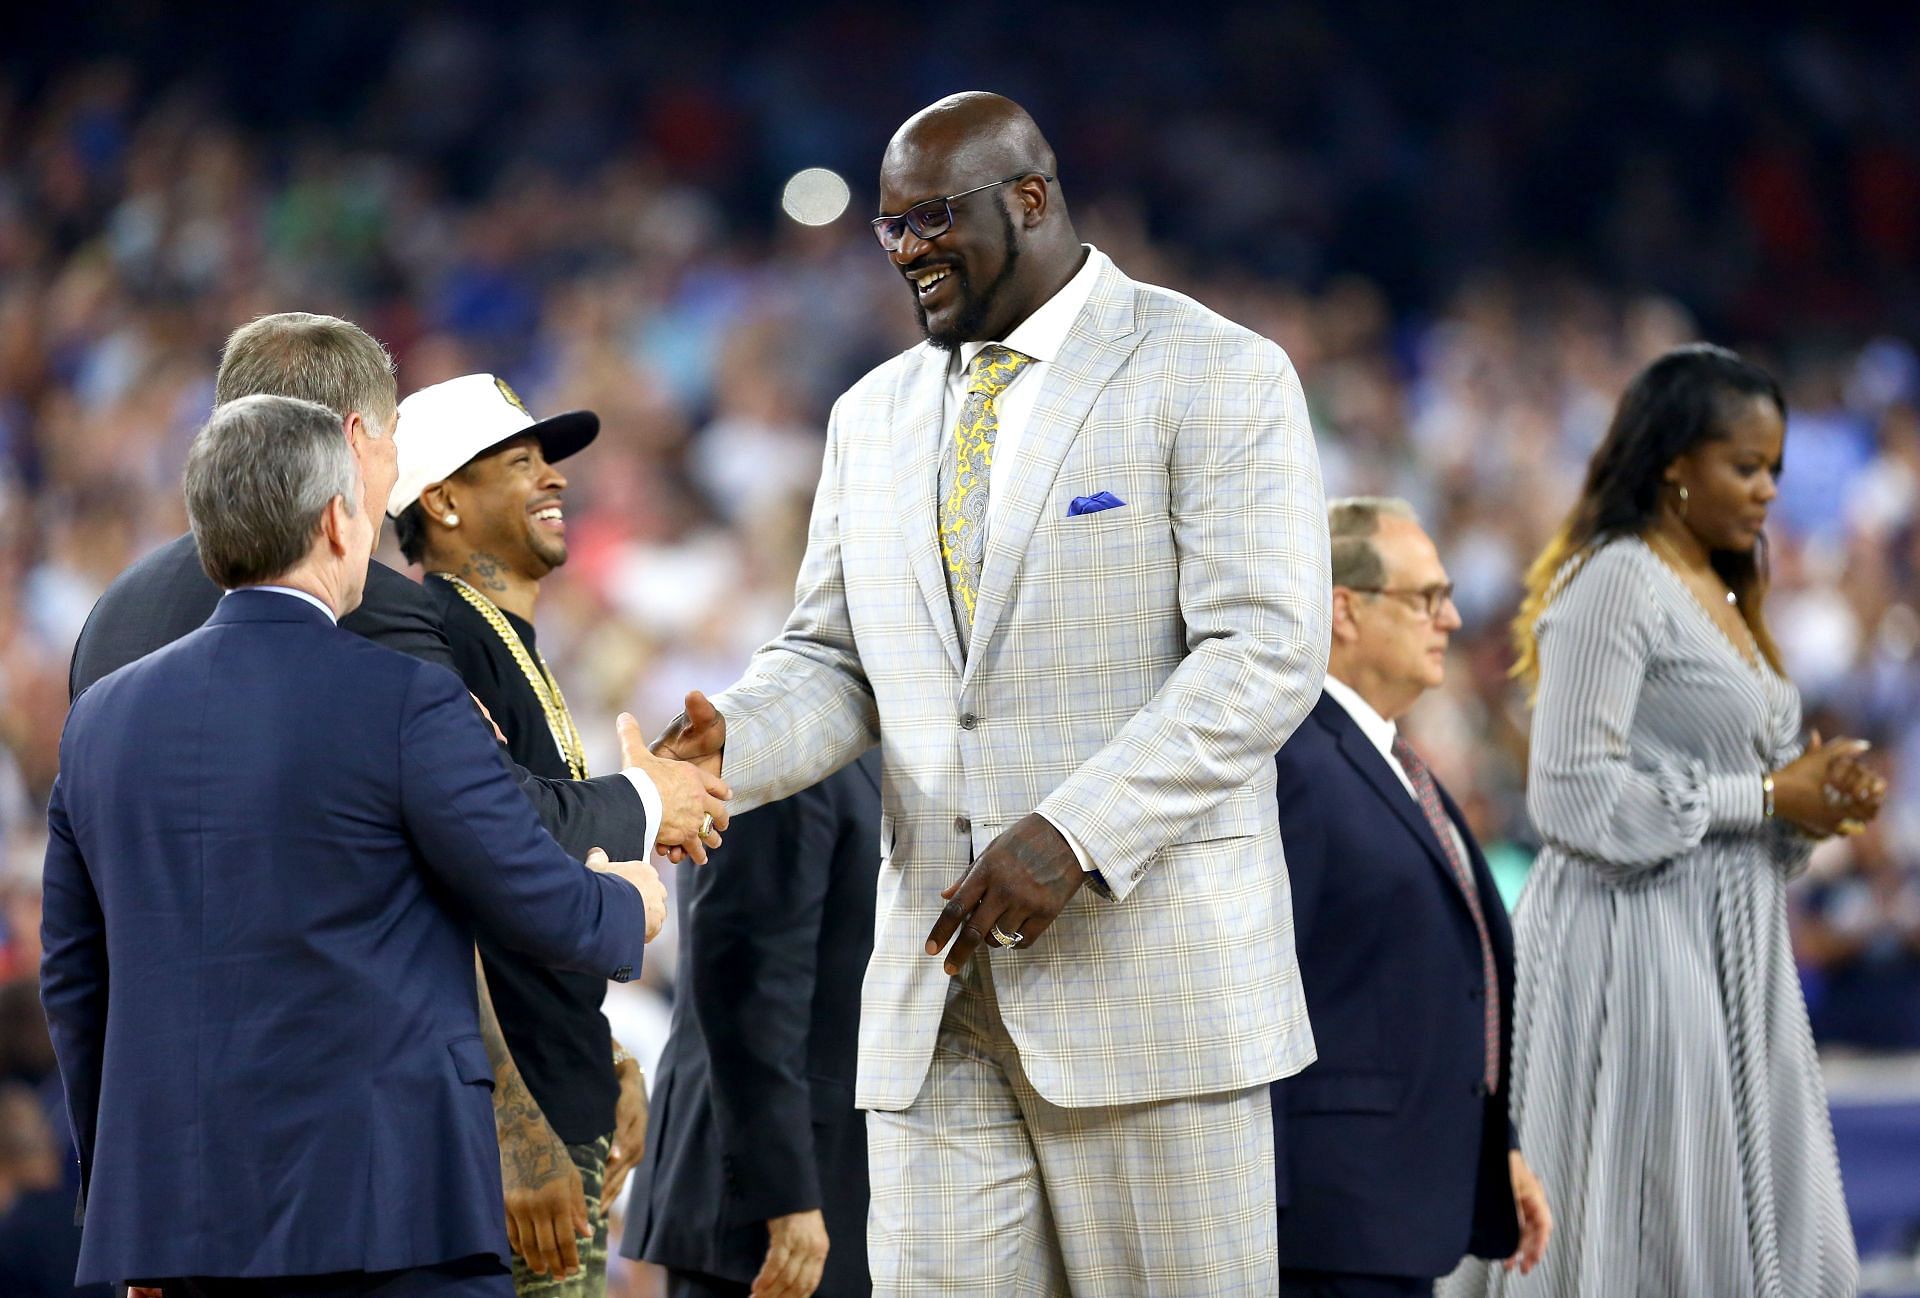 Shaq is a Naismith Memorial Basketball Hall Of Fame member for his on-court performance.